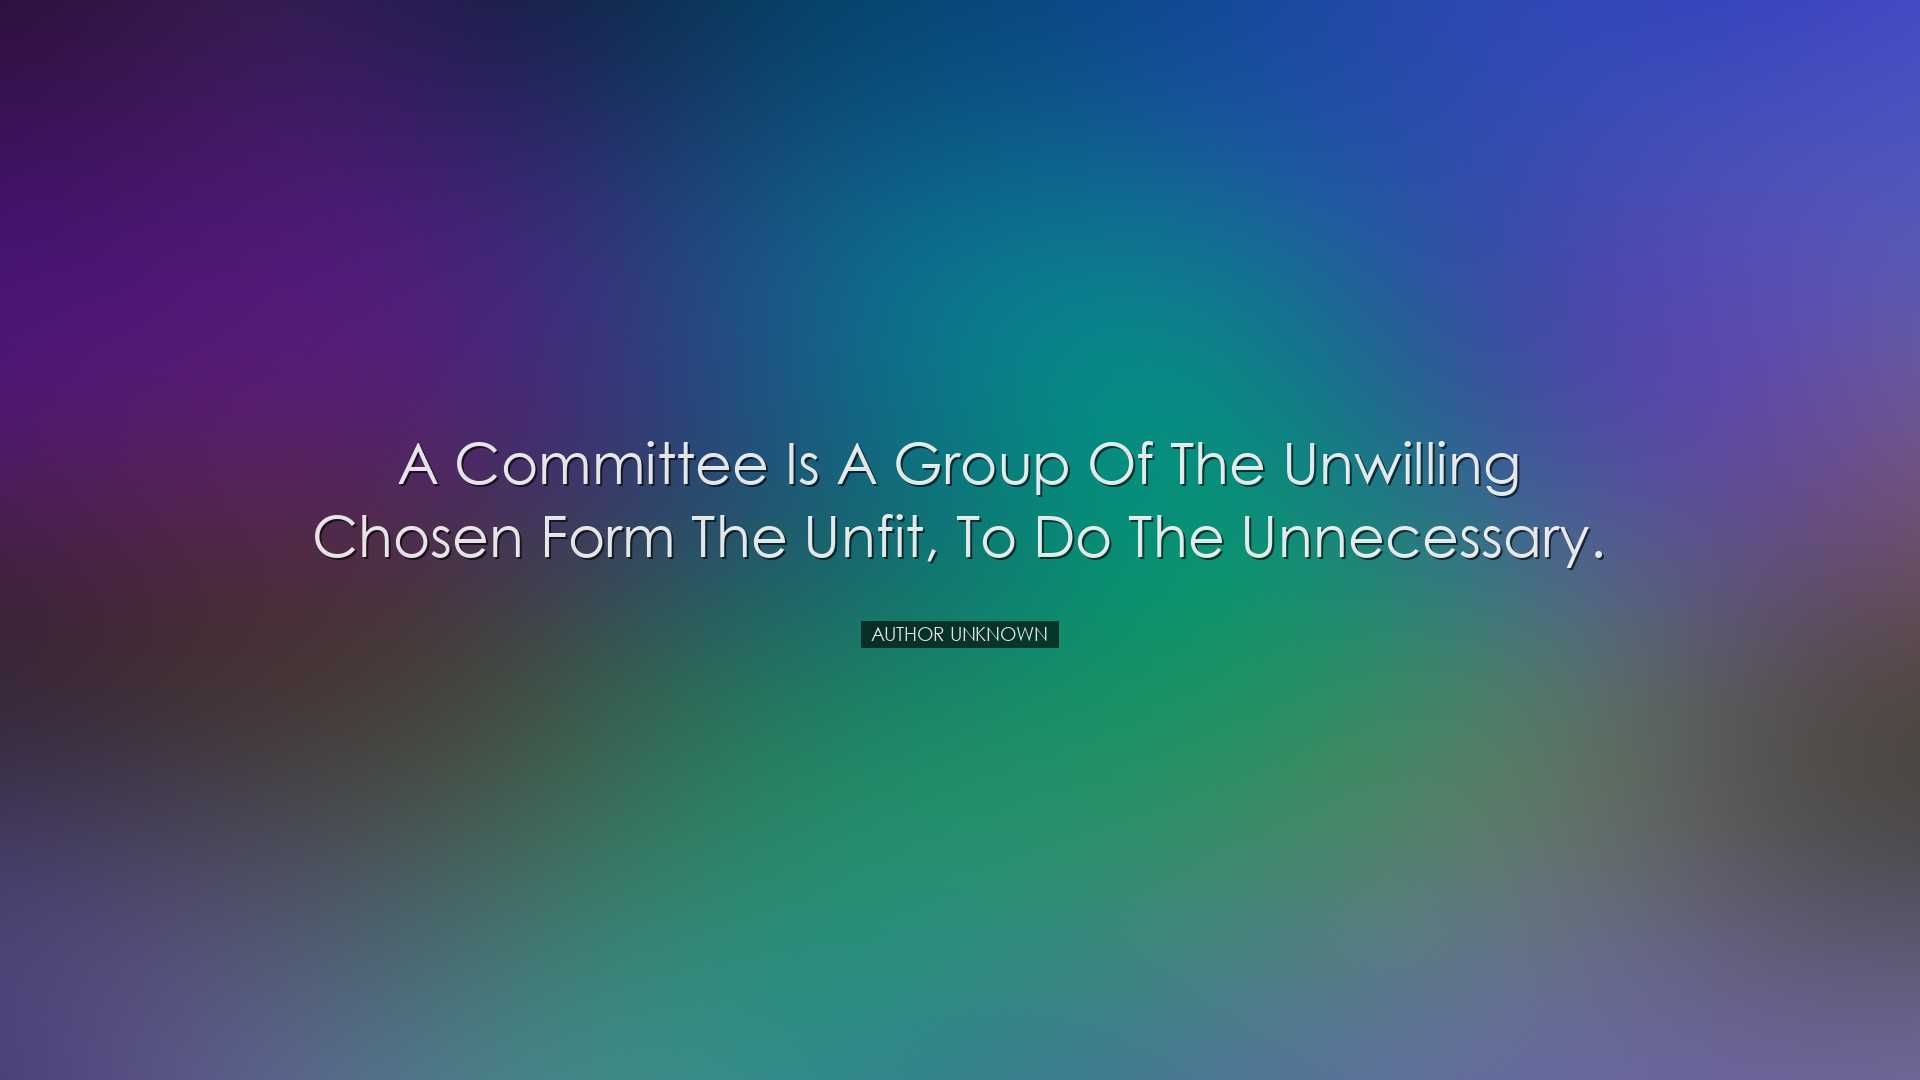 A committee is a group of the unwilling chosen form the unfit, to